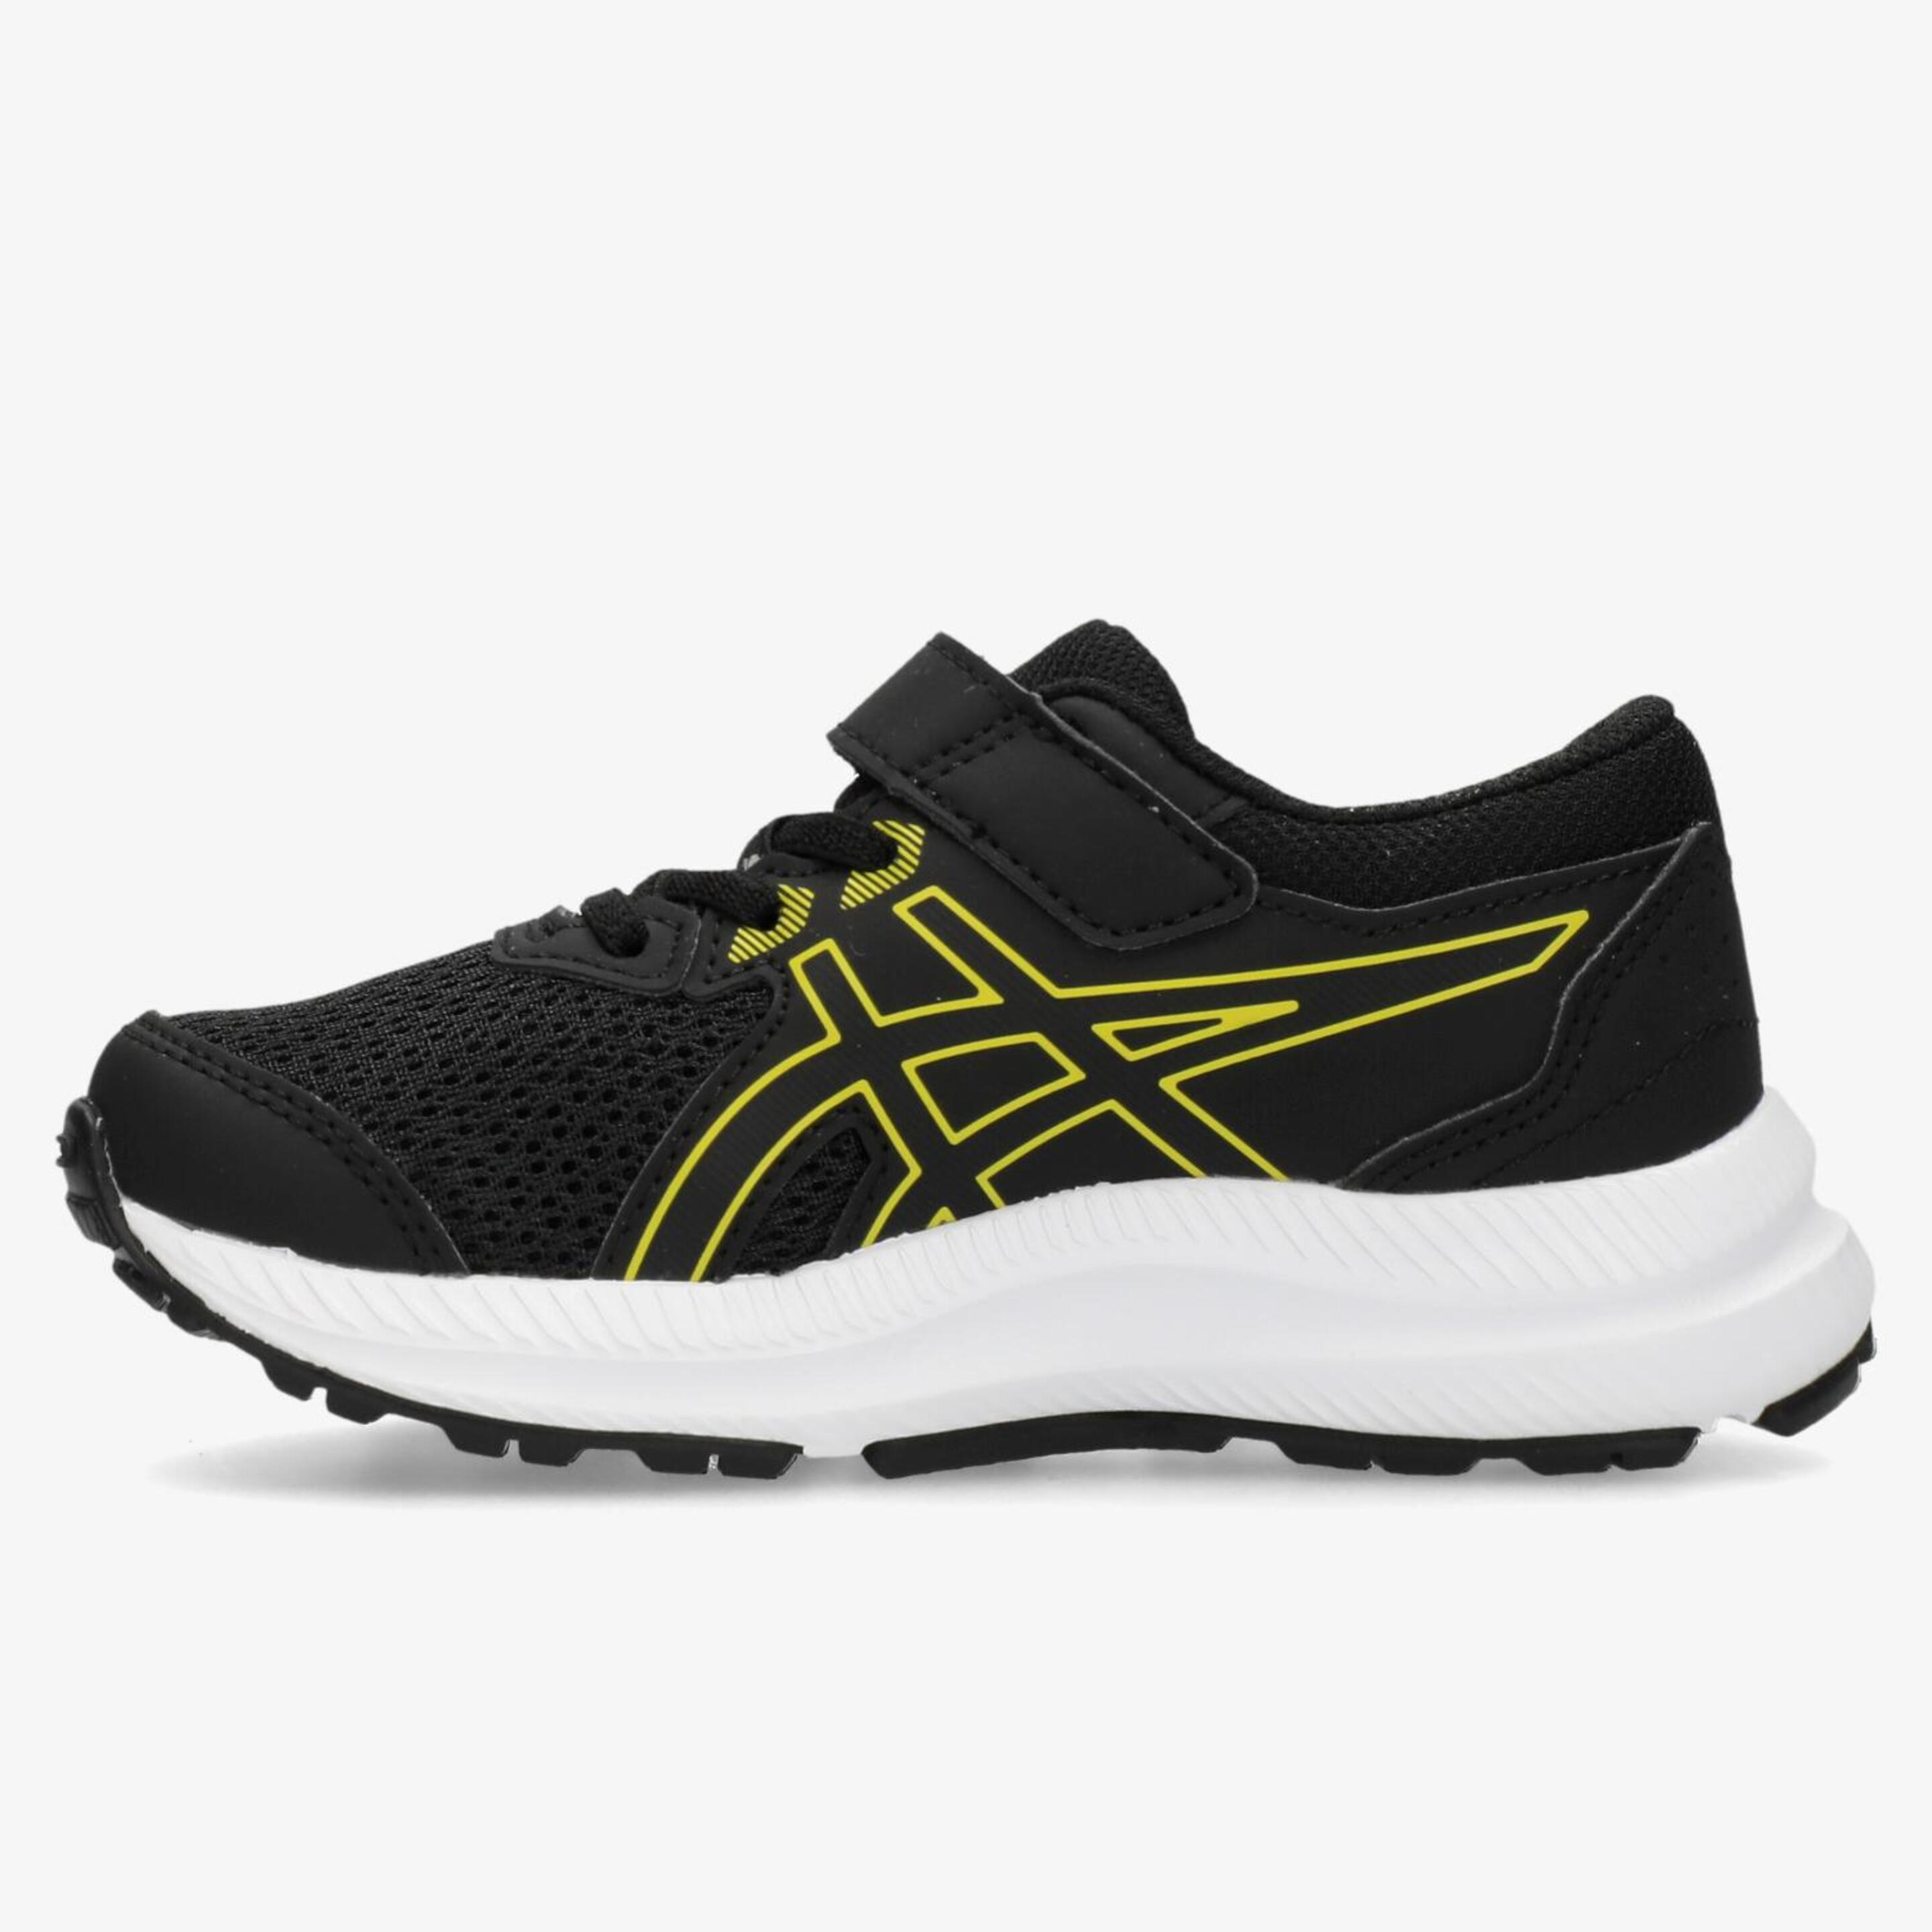 ASICS Contend 8 Ps